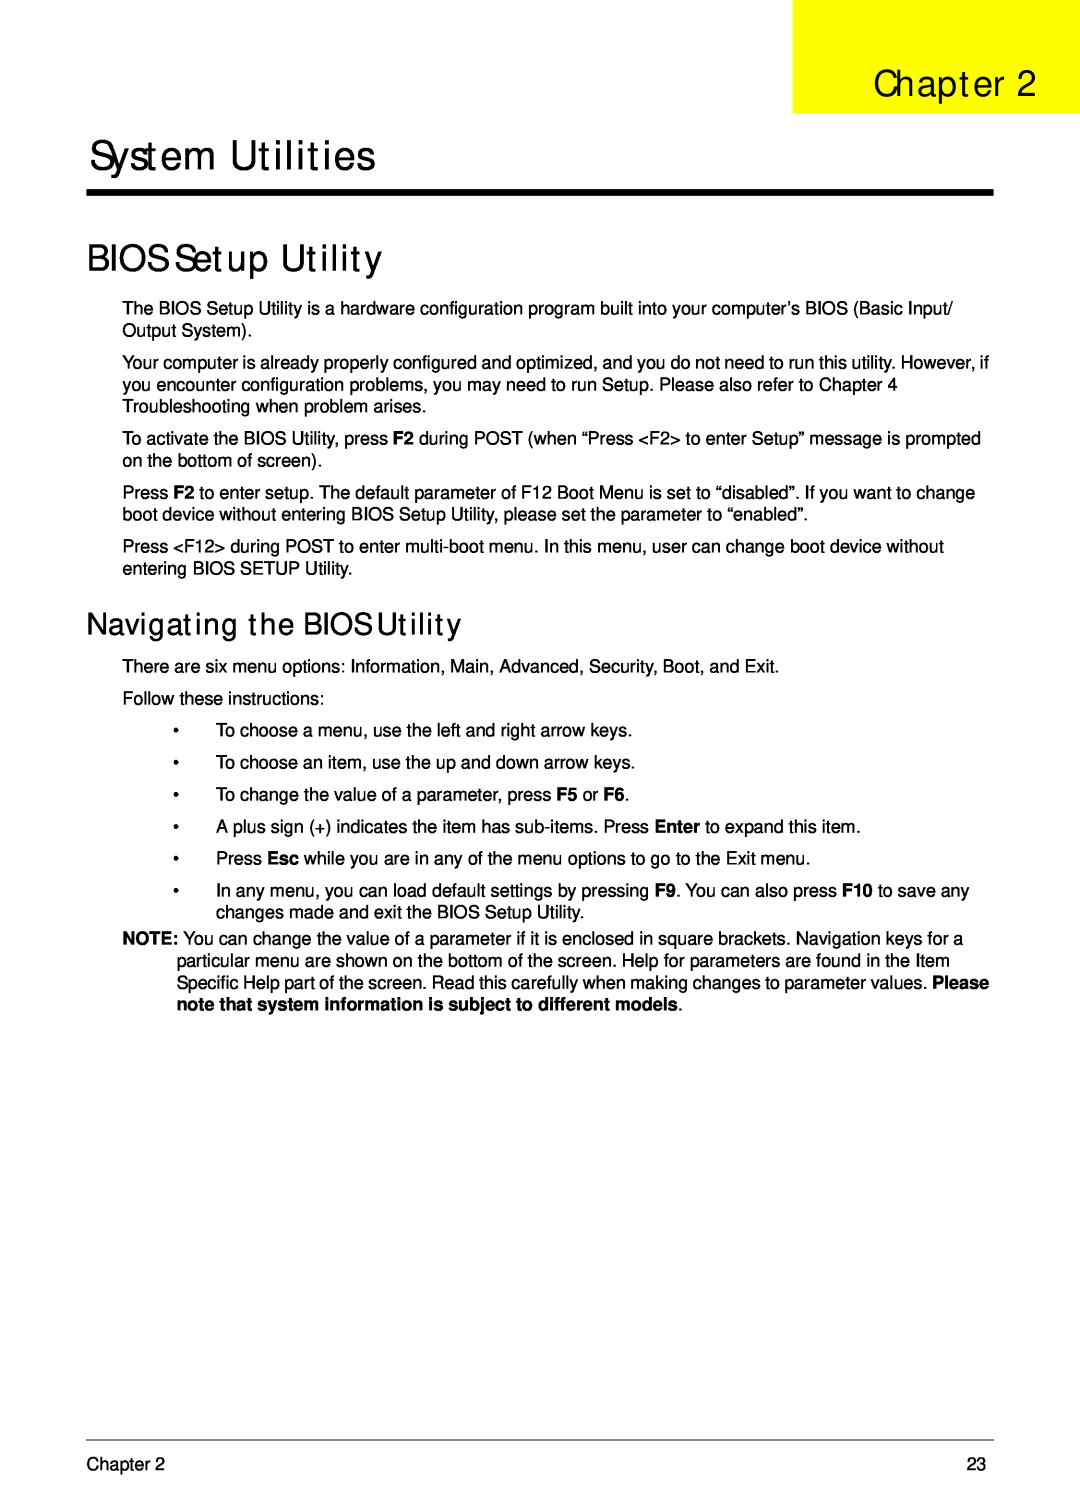 Acer 5532 manual System Utilities, BIOS Setup Utility, Navigating the BIOS Utility, Chapter 